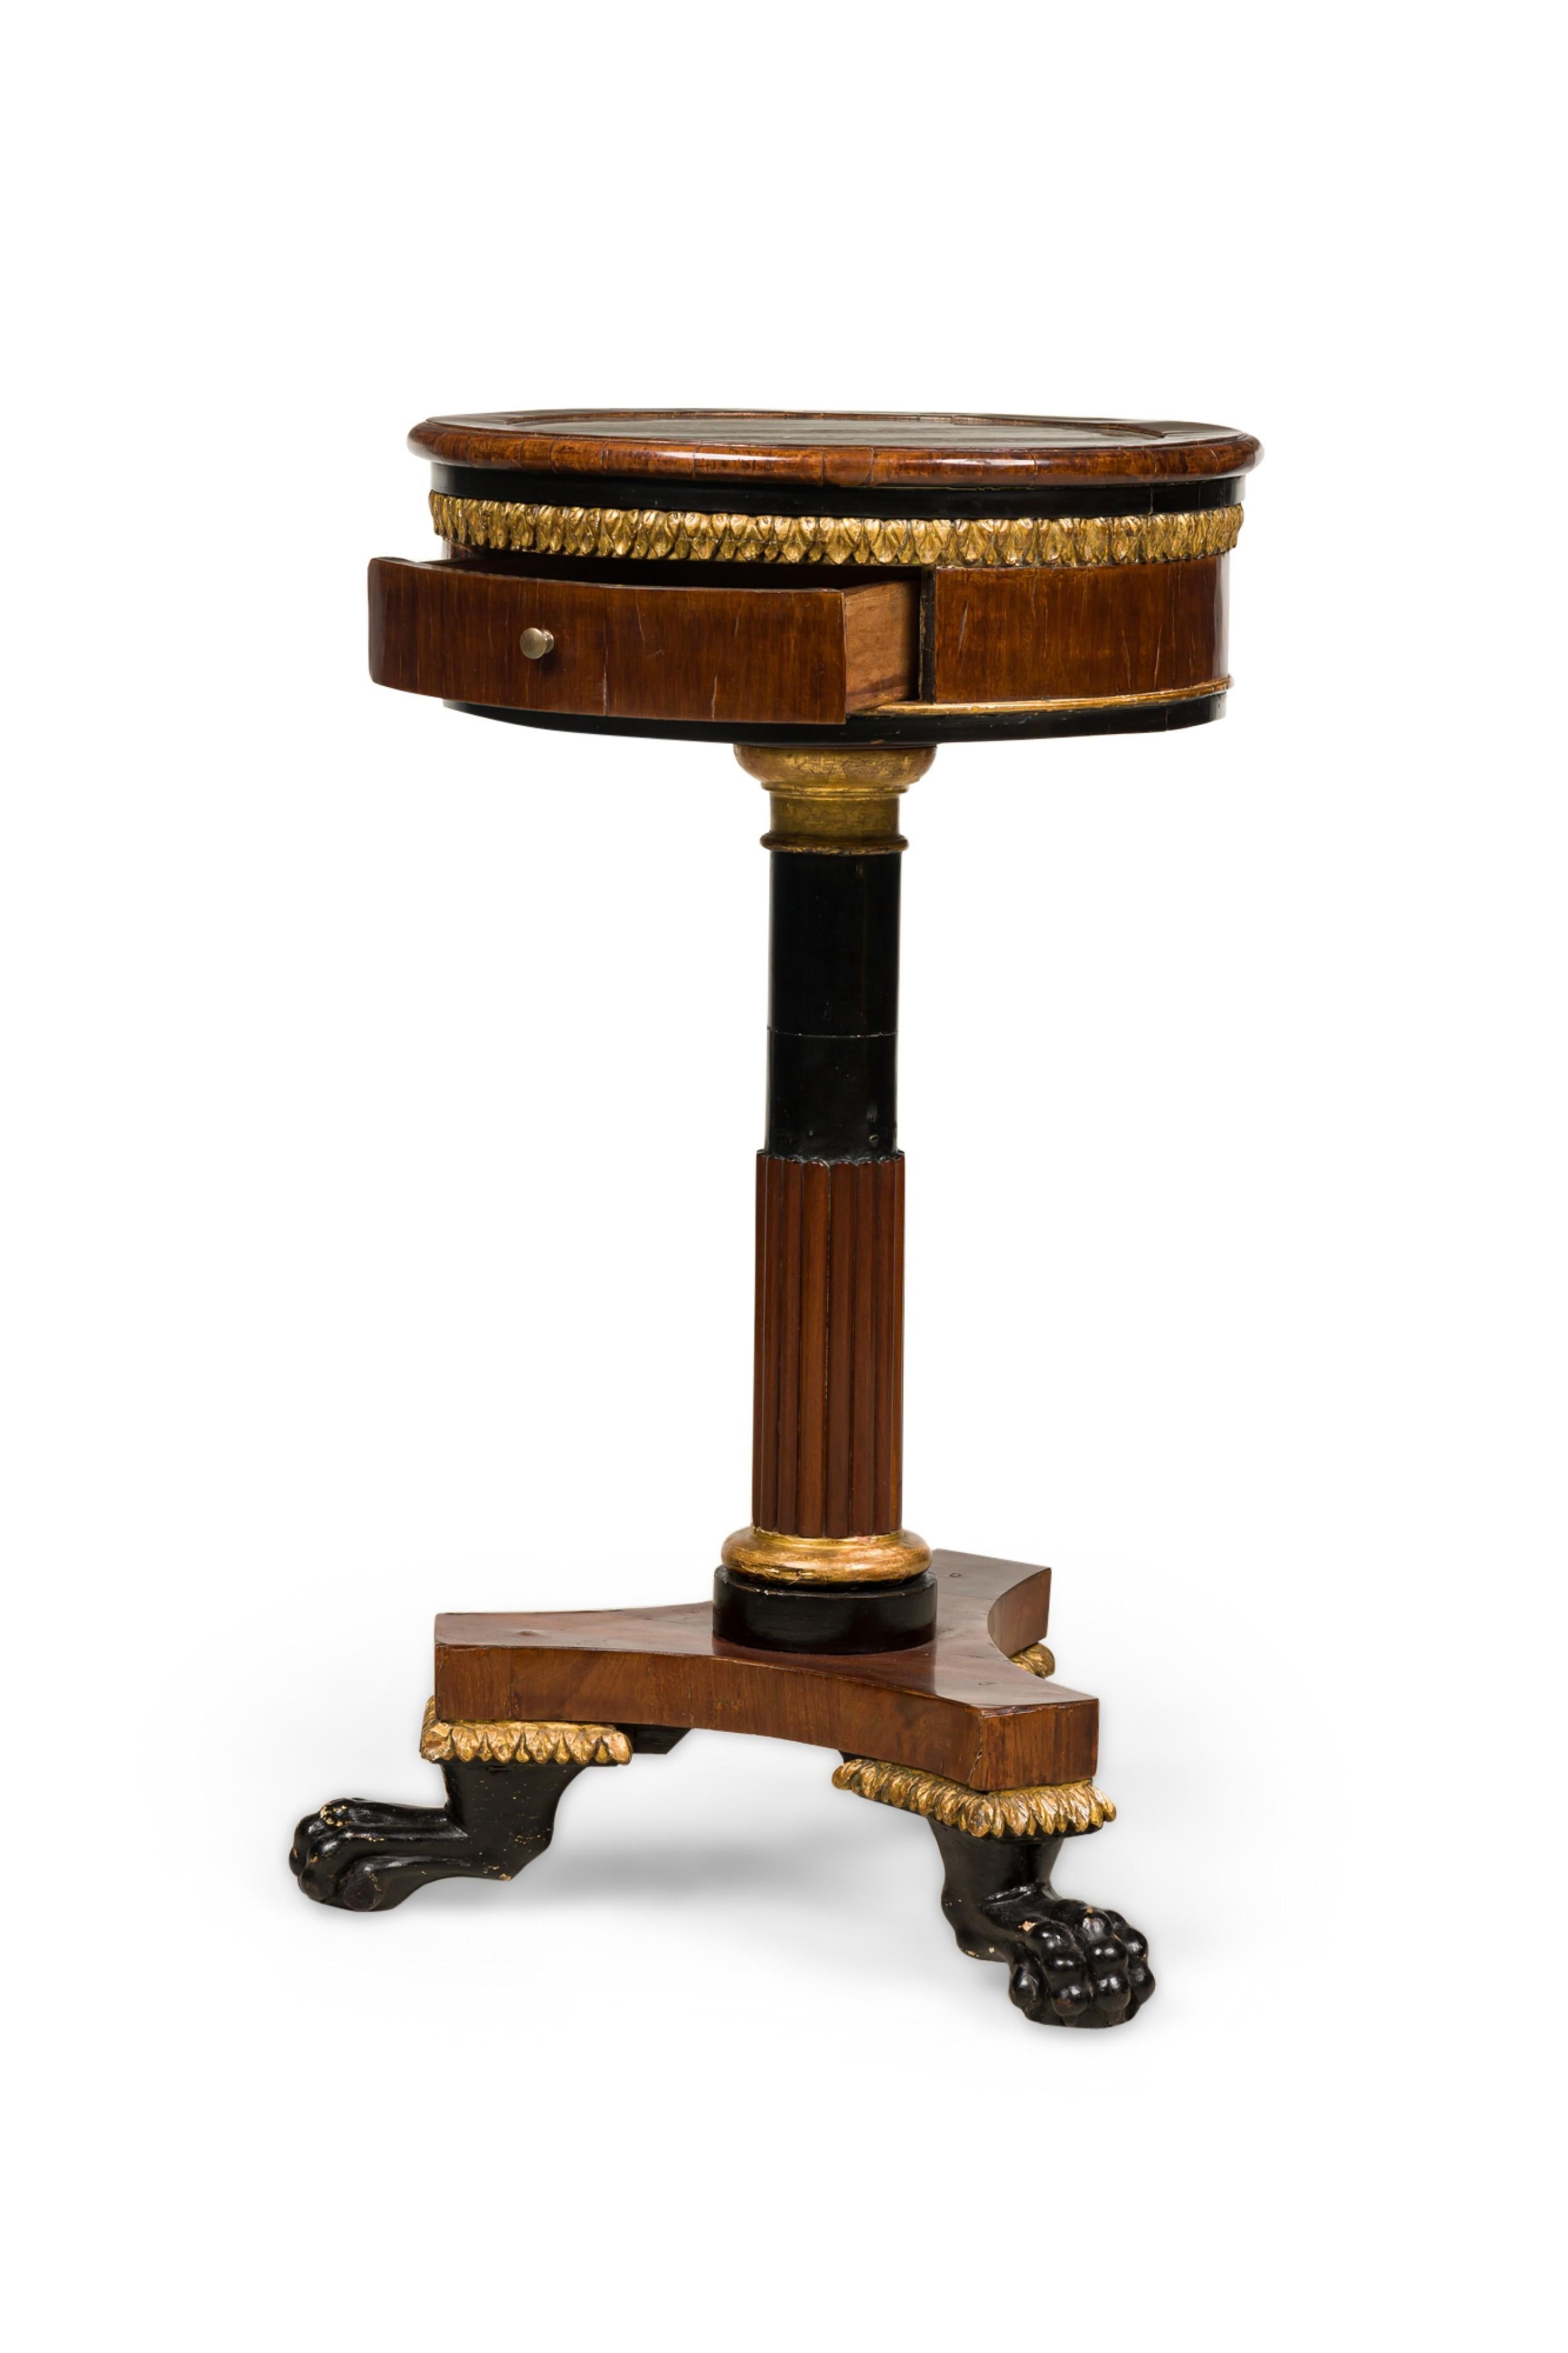 Pair of Italian Neoclassicalal Mahogany and Marble Gueirdon End Table For Sale 3